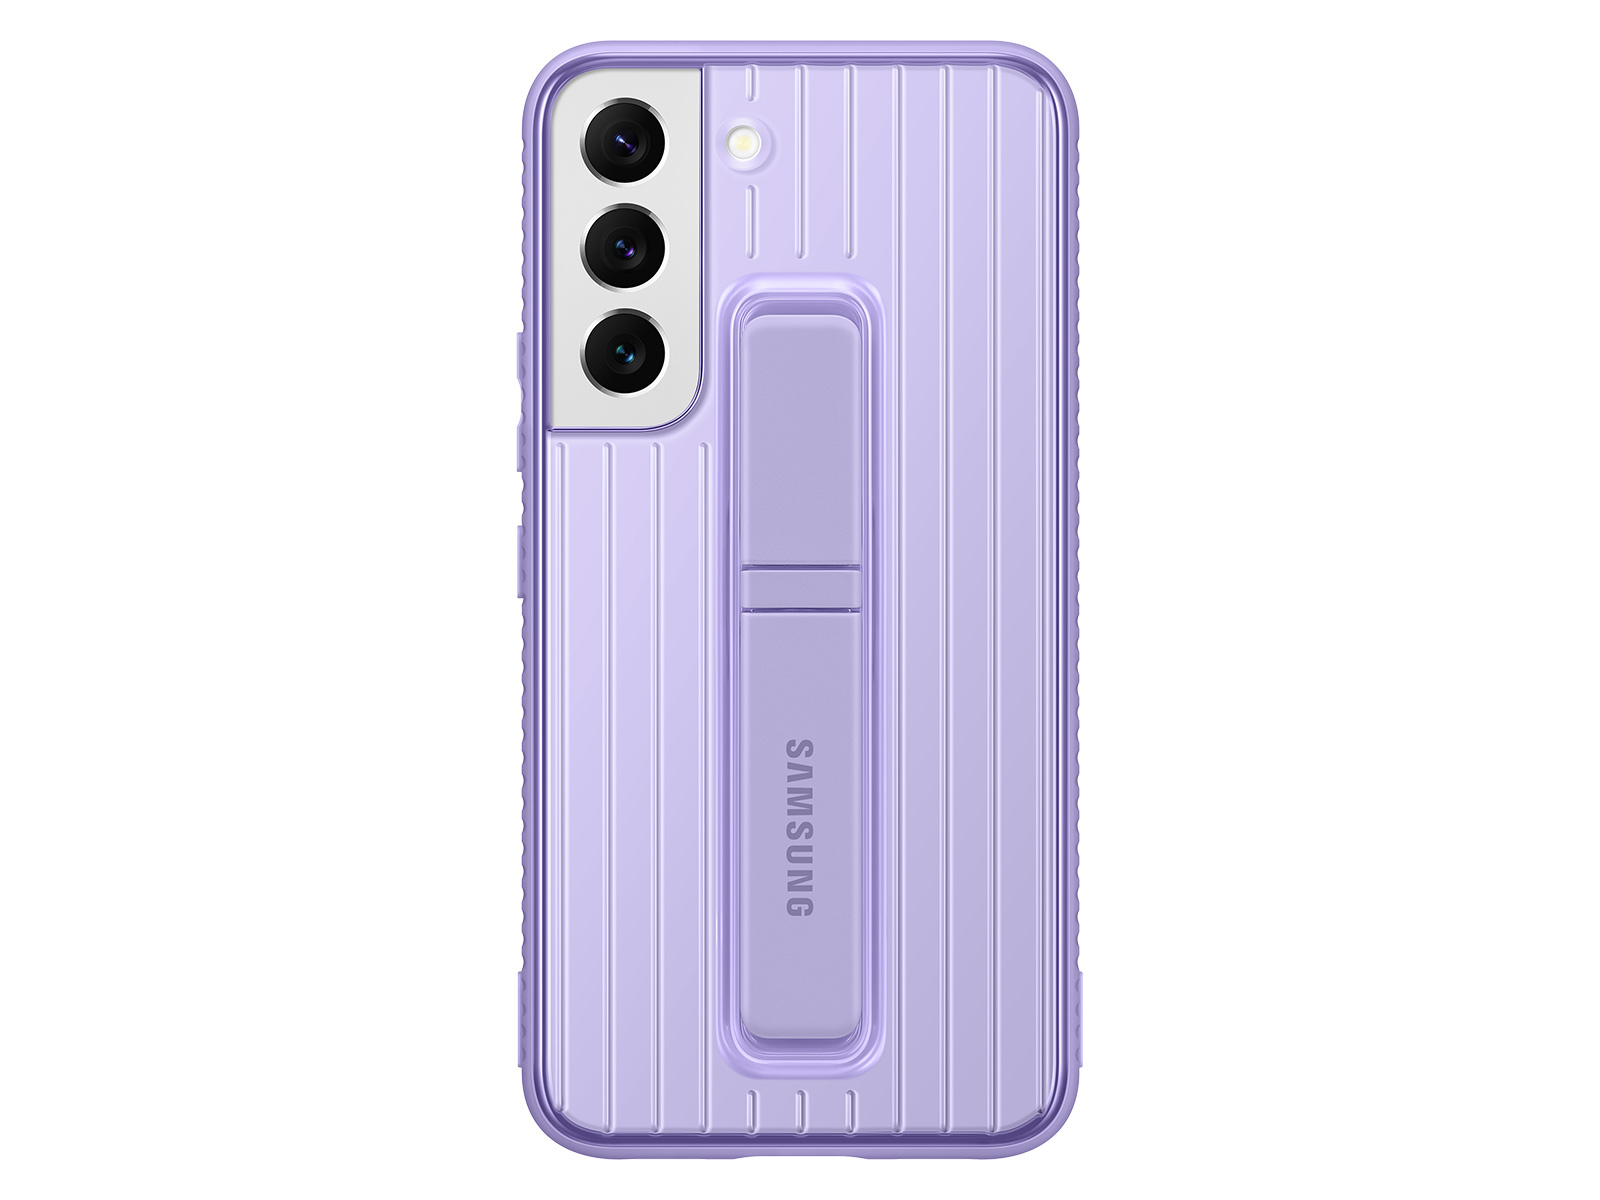 Galaxy S22 Protective Standing Cover, Fresh Lavender Mobile Accessories ...